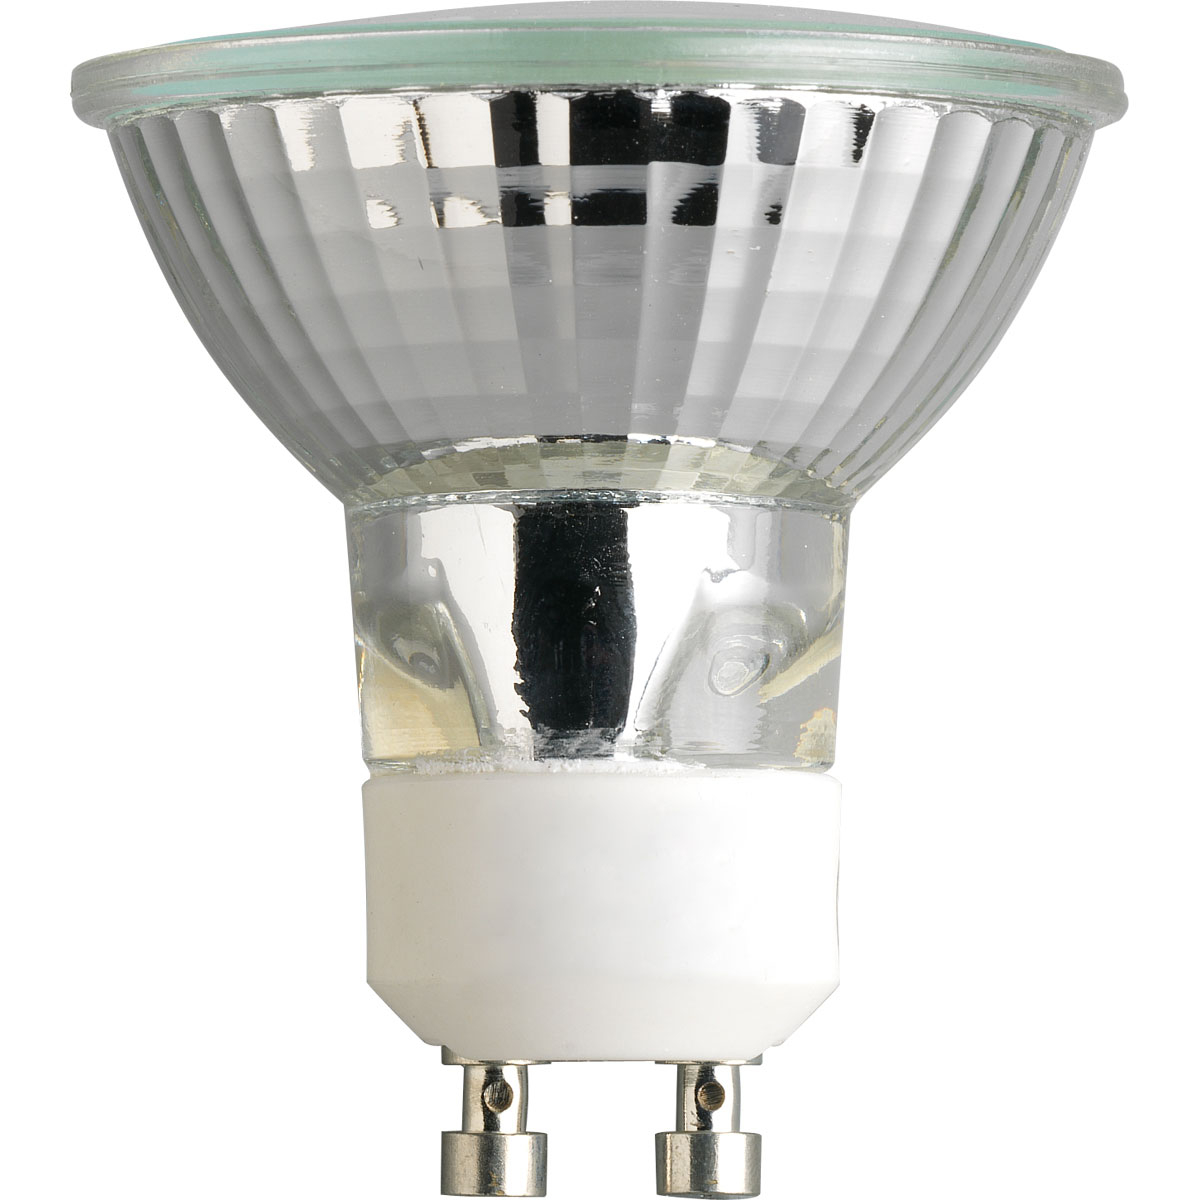 This MR16 light bulb is the ideal choice for decorative or track lighting. Bright, white light adds value to your home with directional light from this medium flood bulb. Easy to install design uses twist-lock bi-pin base to secure bulb into socket. 50w MR16 GU10 MFL coated lamp eliminates the pink color.